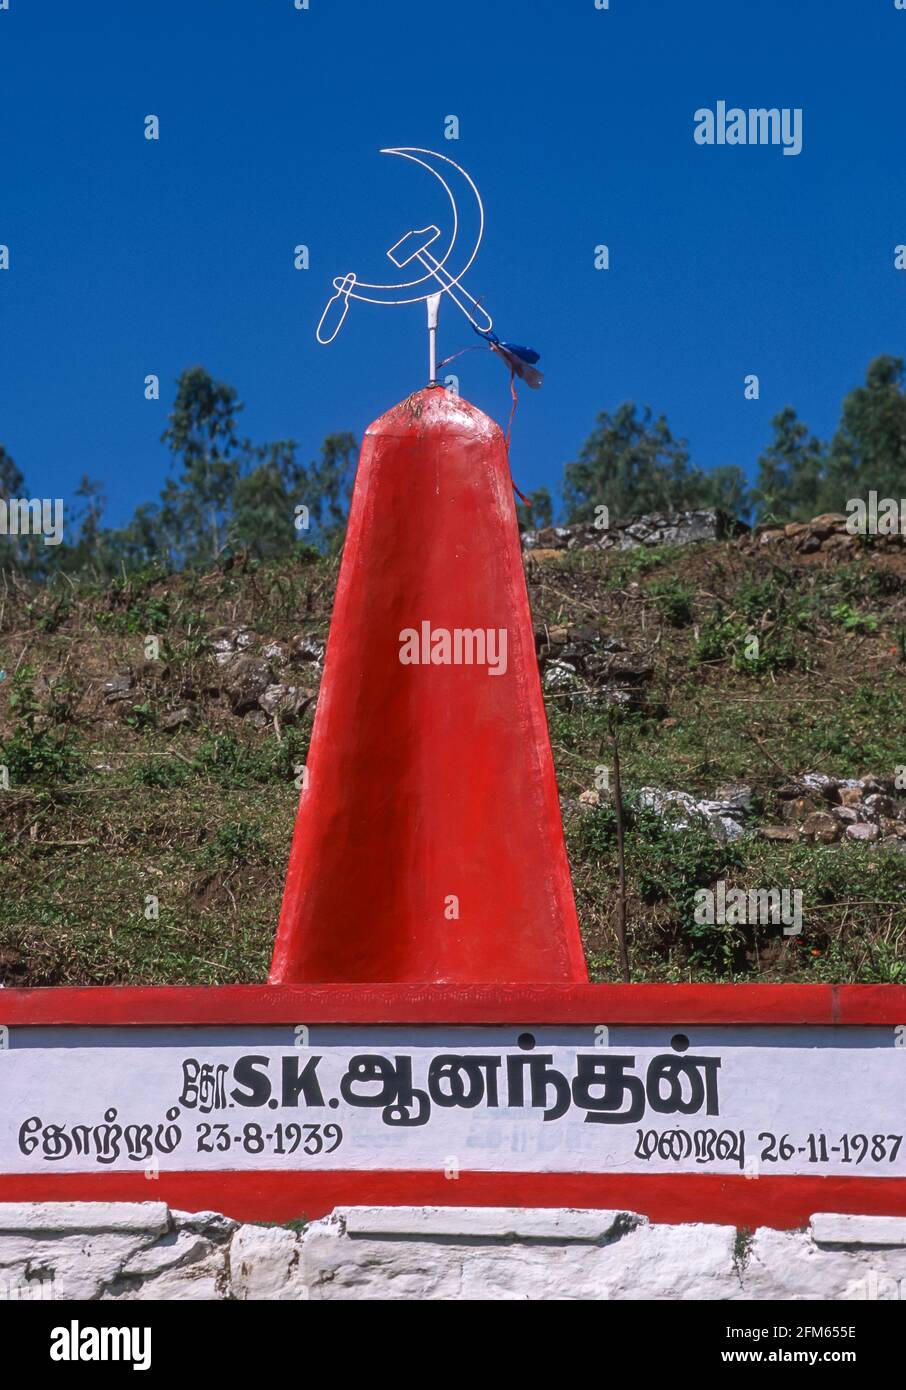 KERALA, INDIA - Marxism monument with hammer and sickle, in the Western Ghats mountains near Peermade. Stock Photo